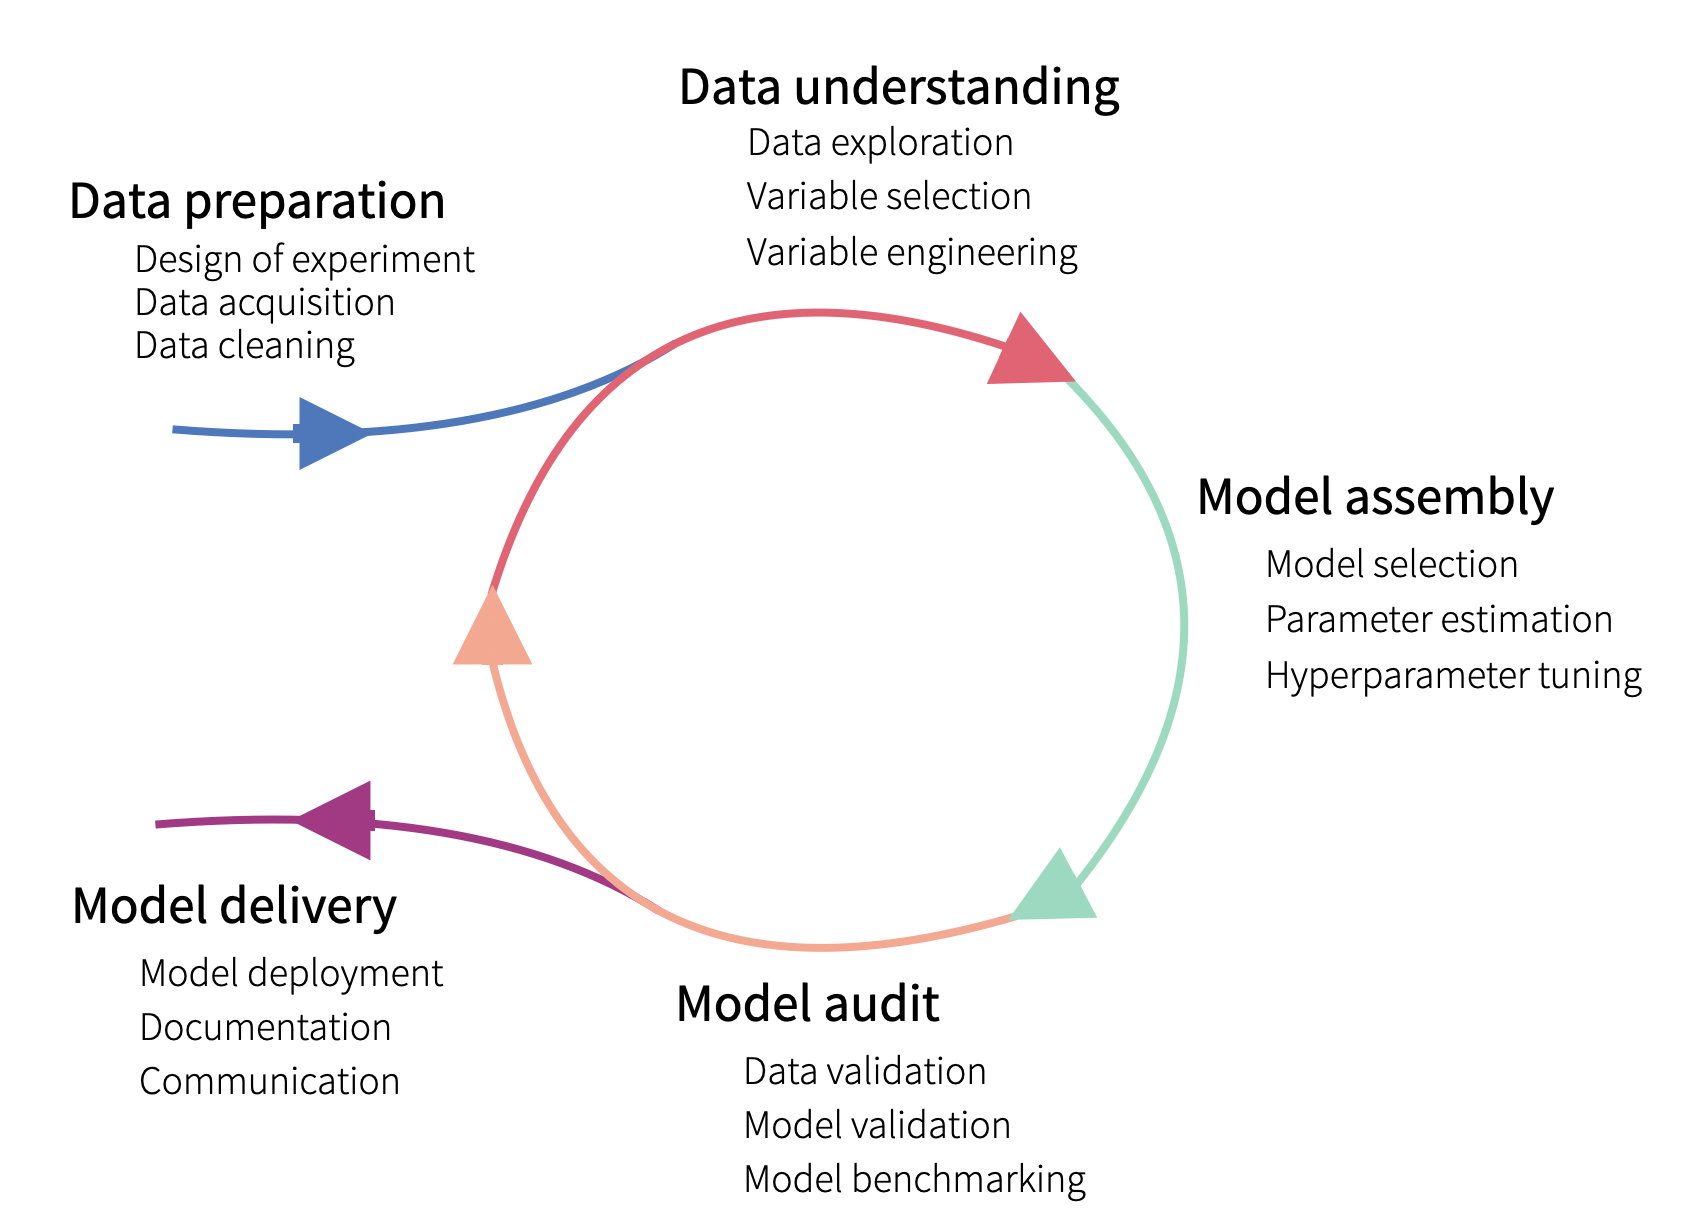 The lifecycle of a predictive model.